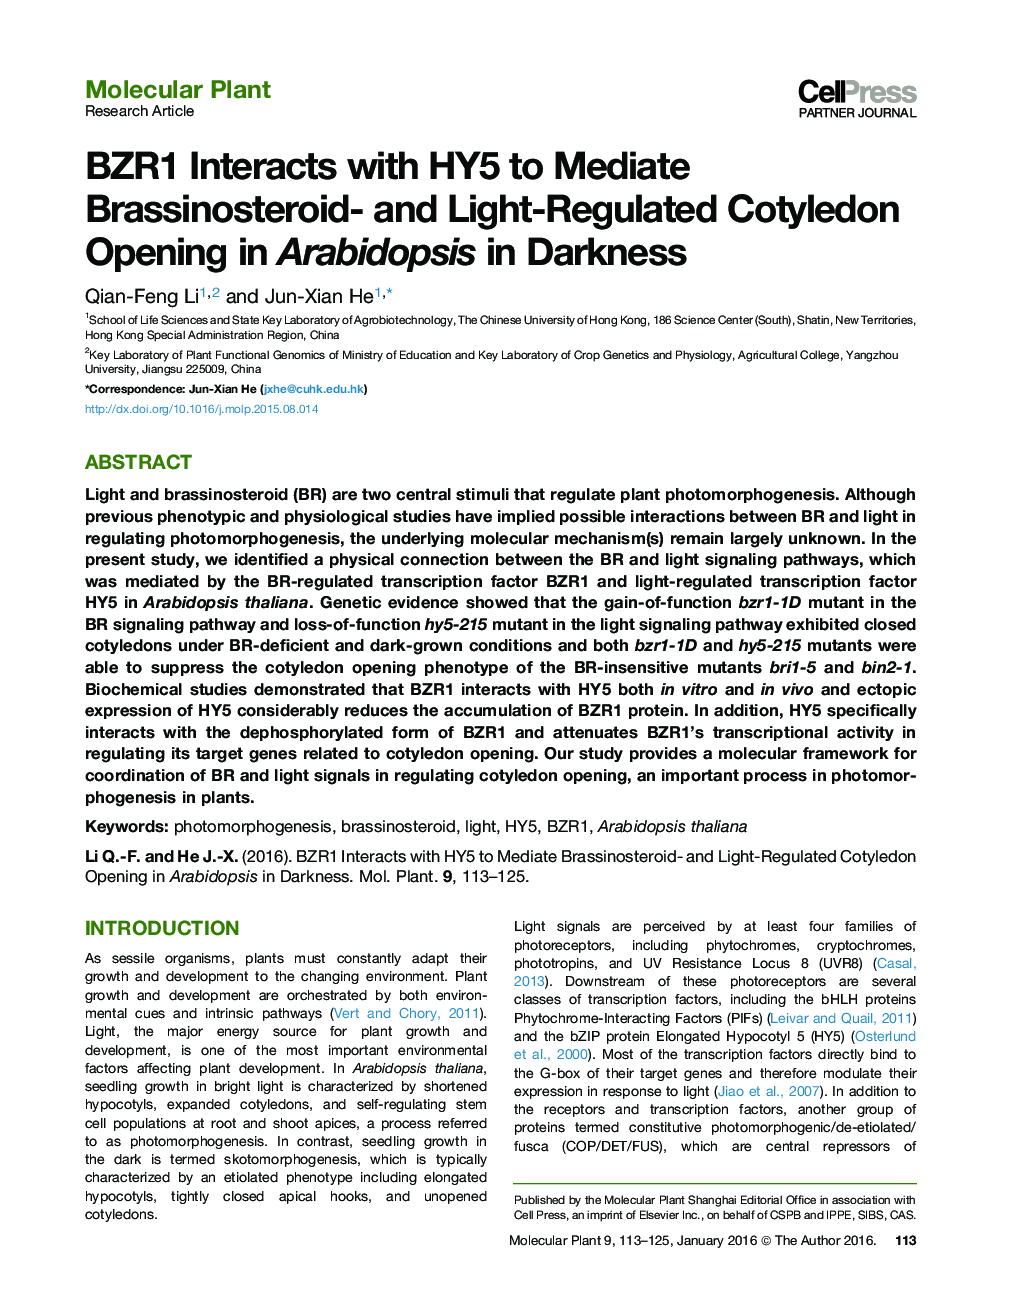 BZR1 Interacts with HY5 to Mediate Brassinosteroid- and Light-Regulated Cotyledon Opening in Arabidopsis in Darkness 